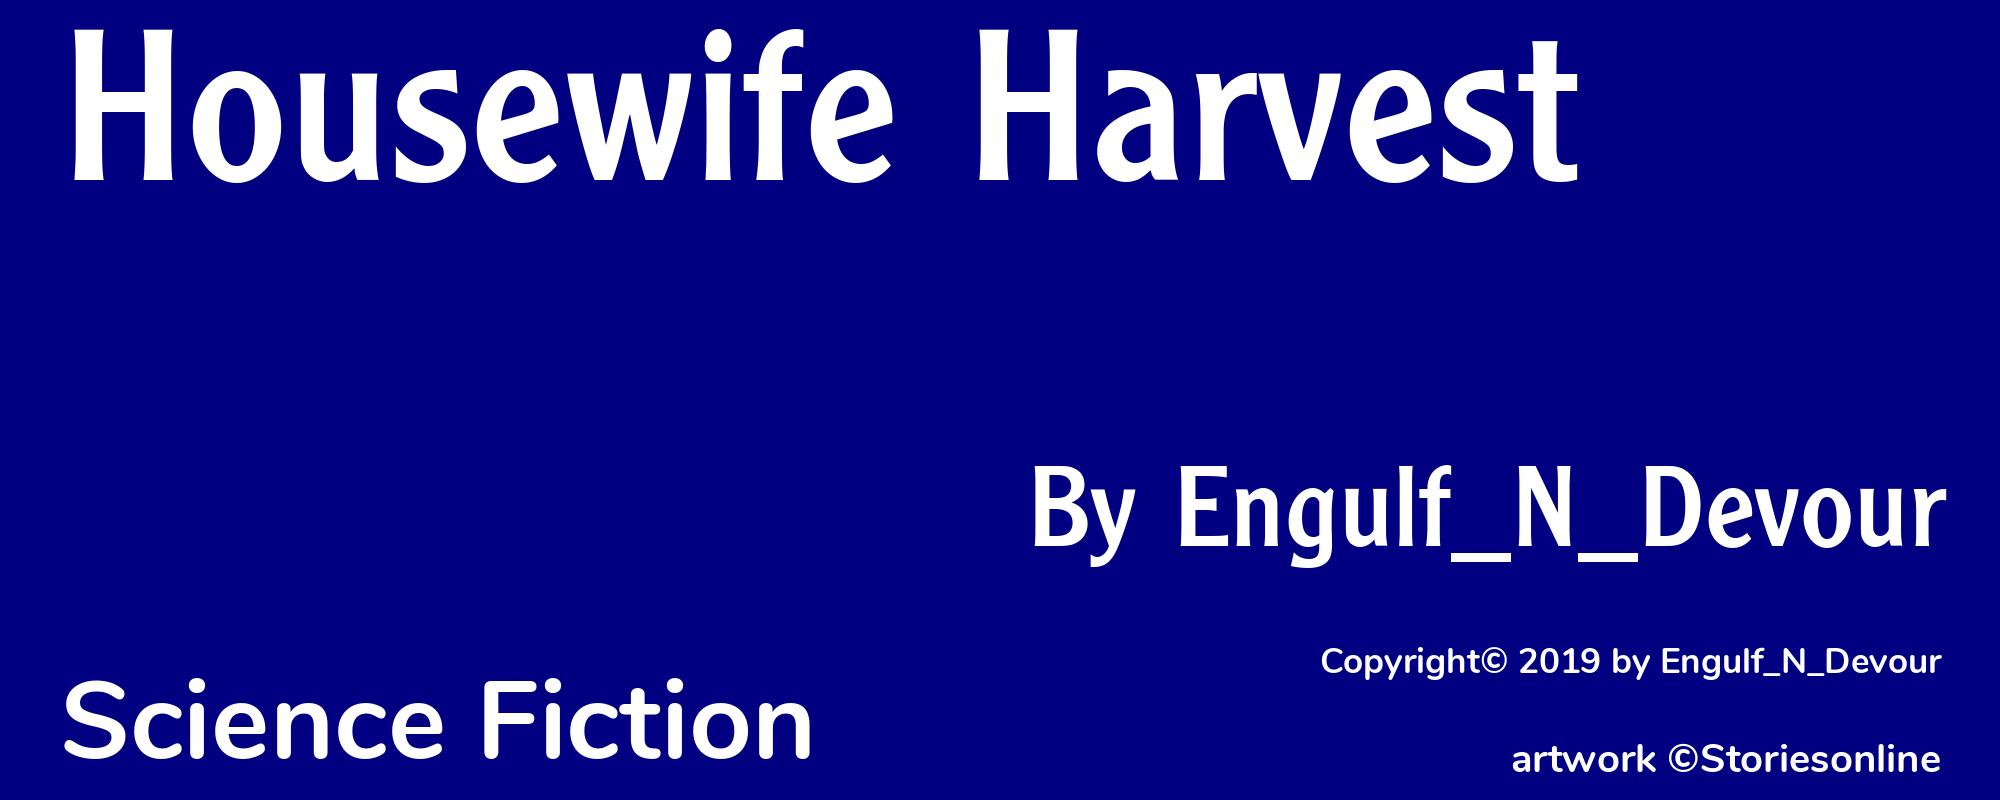 Housewife Harvest - Cover